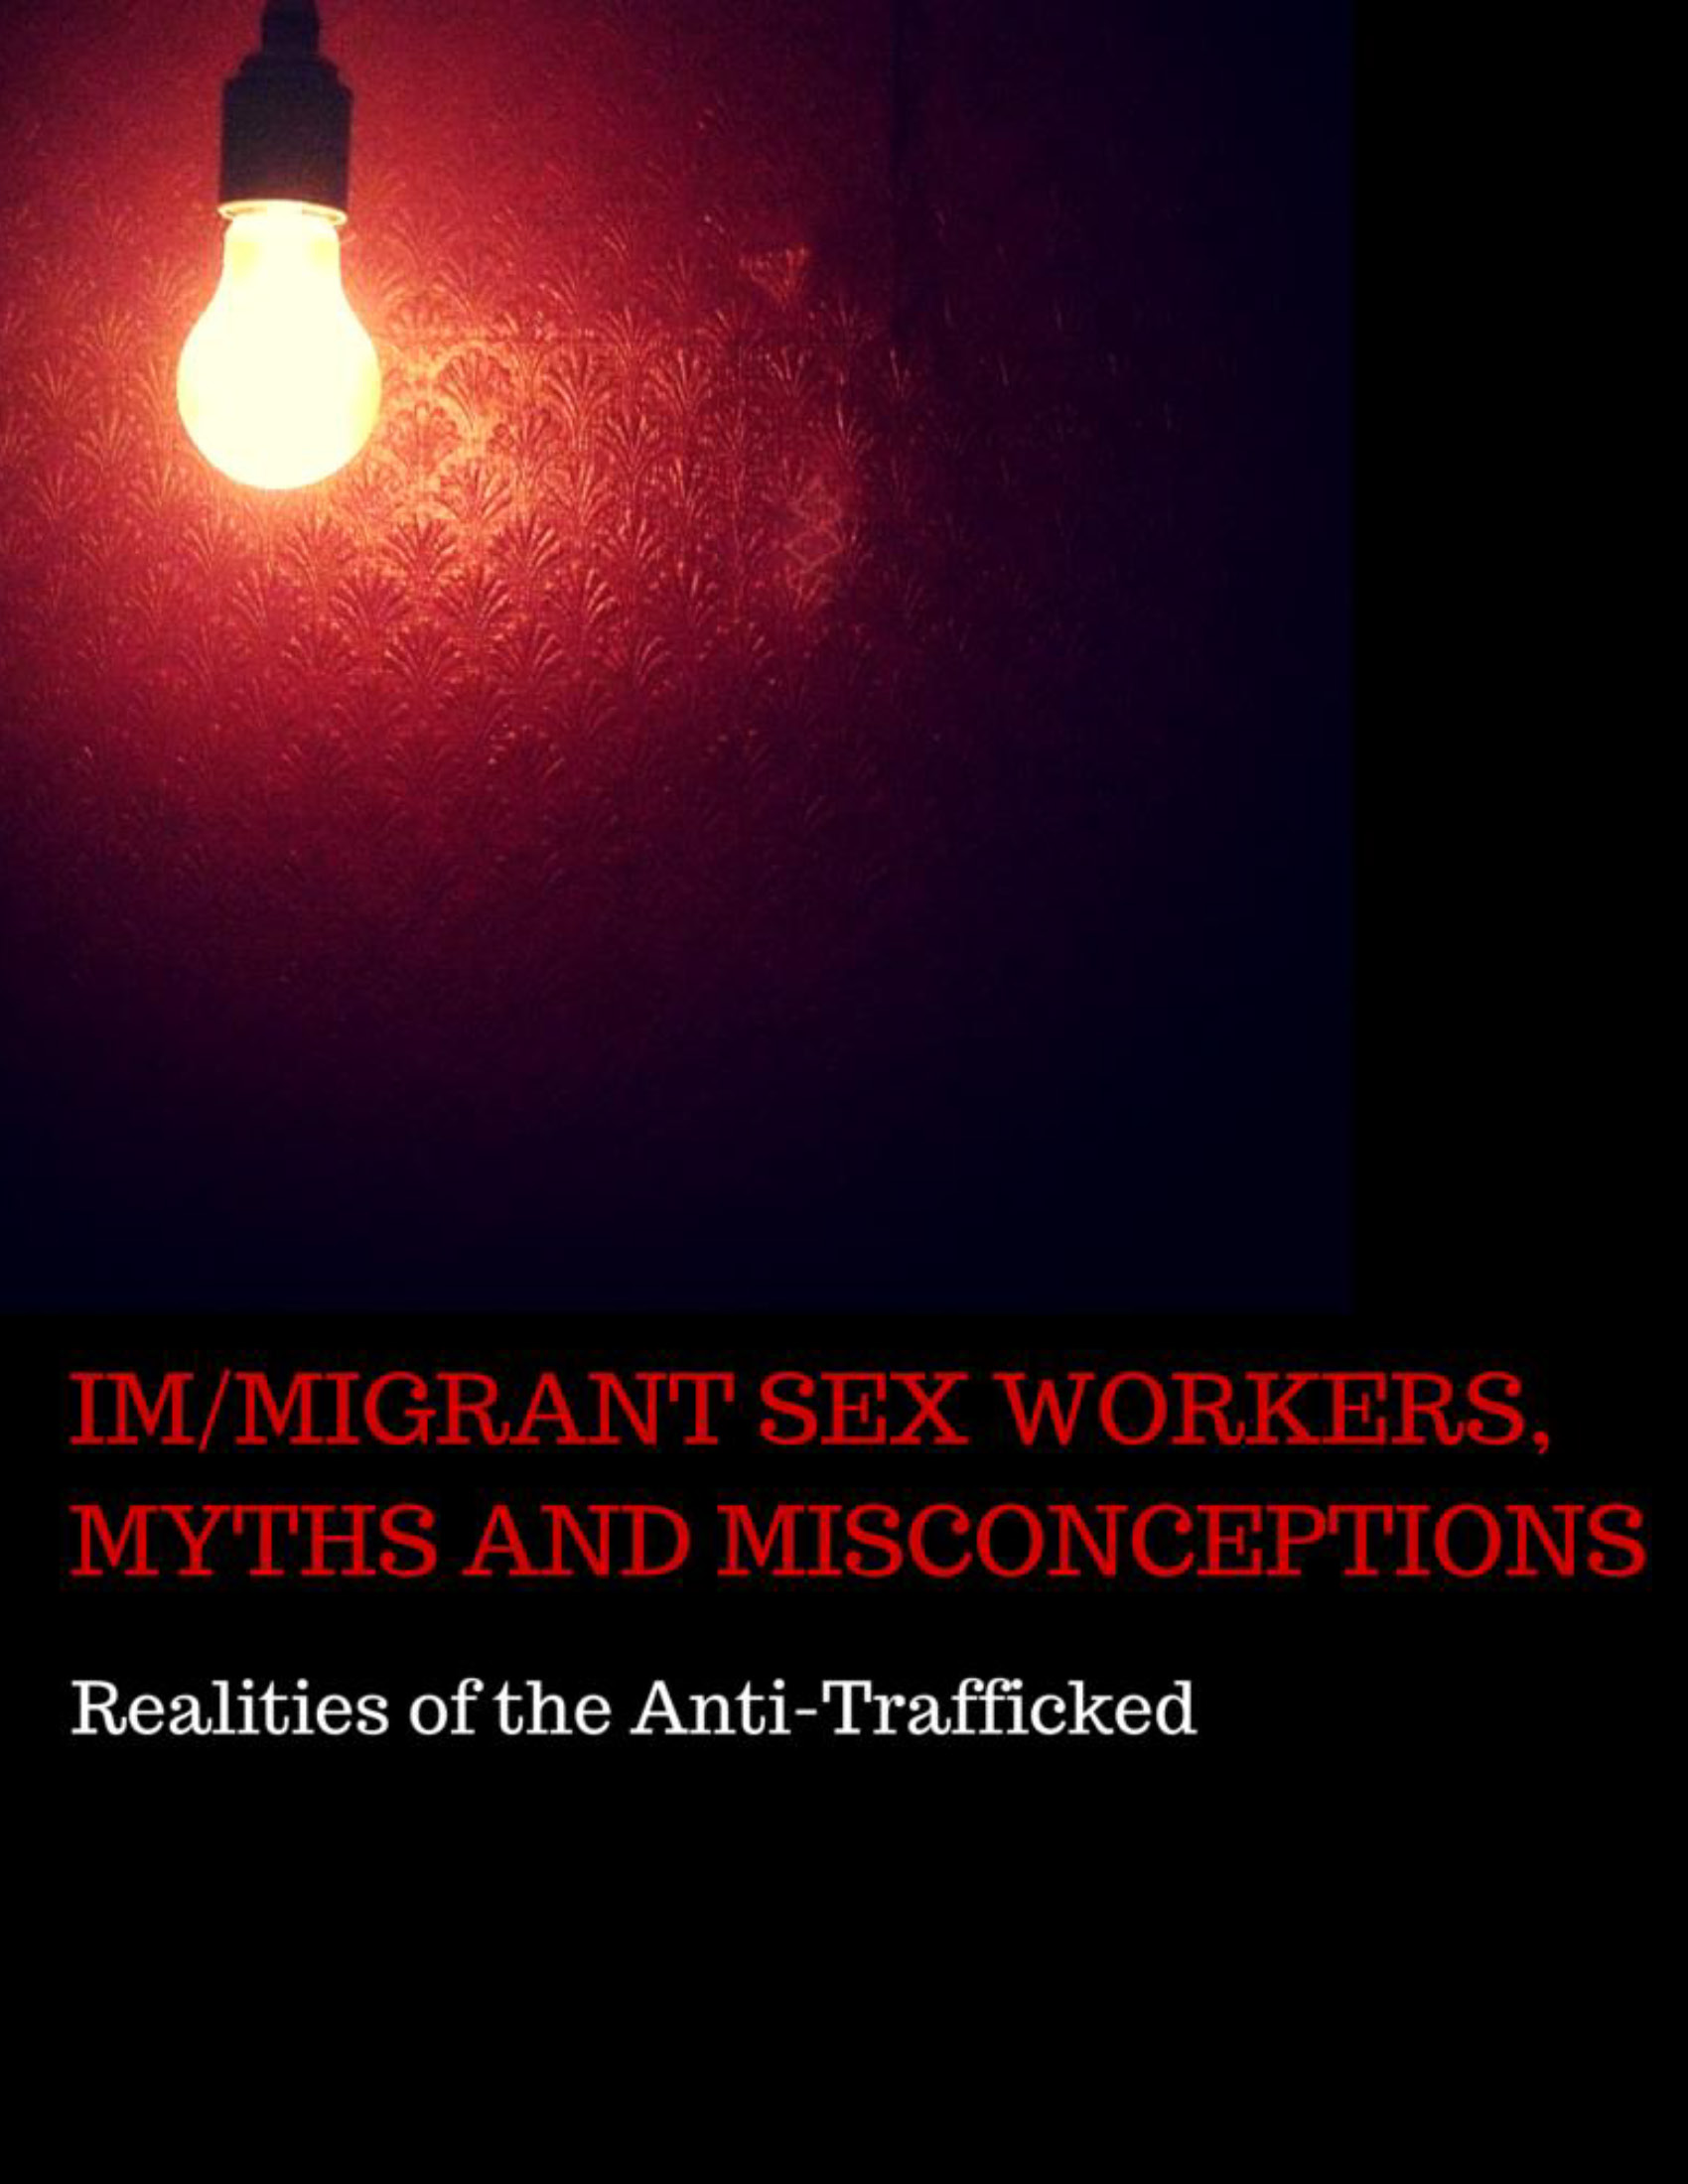 Im-Migrant Sex Workers, Myths & Misconceptions